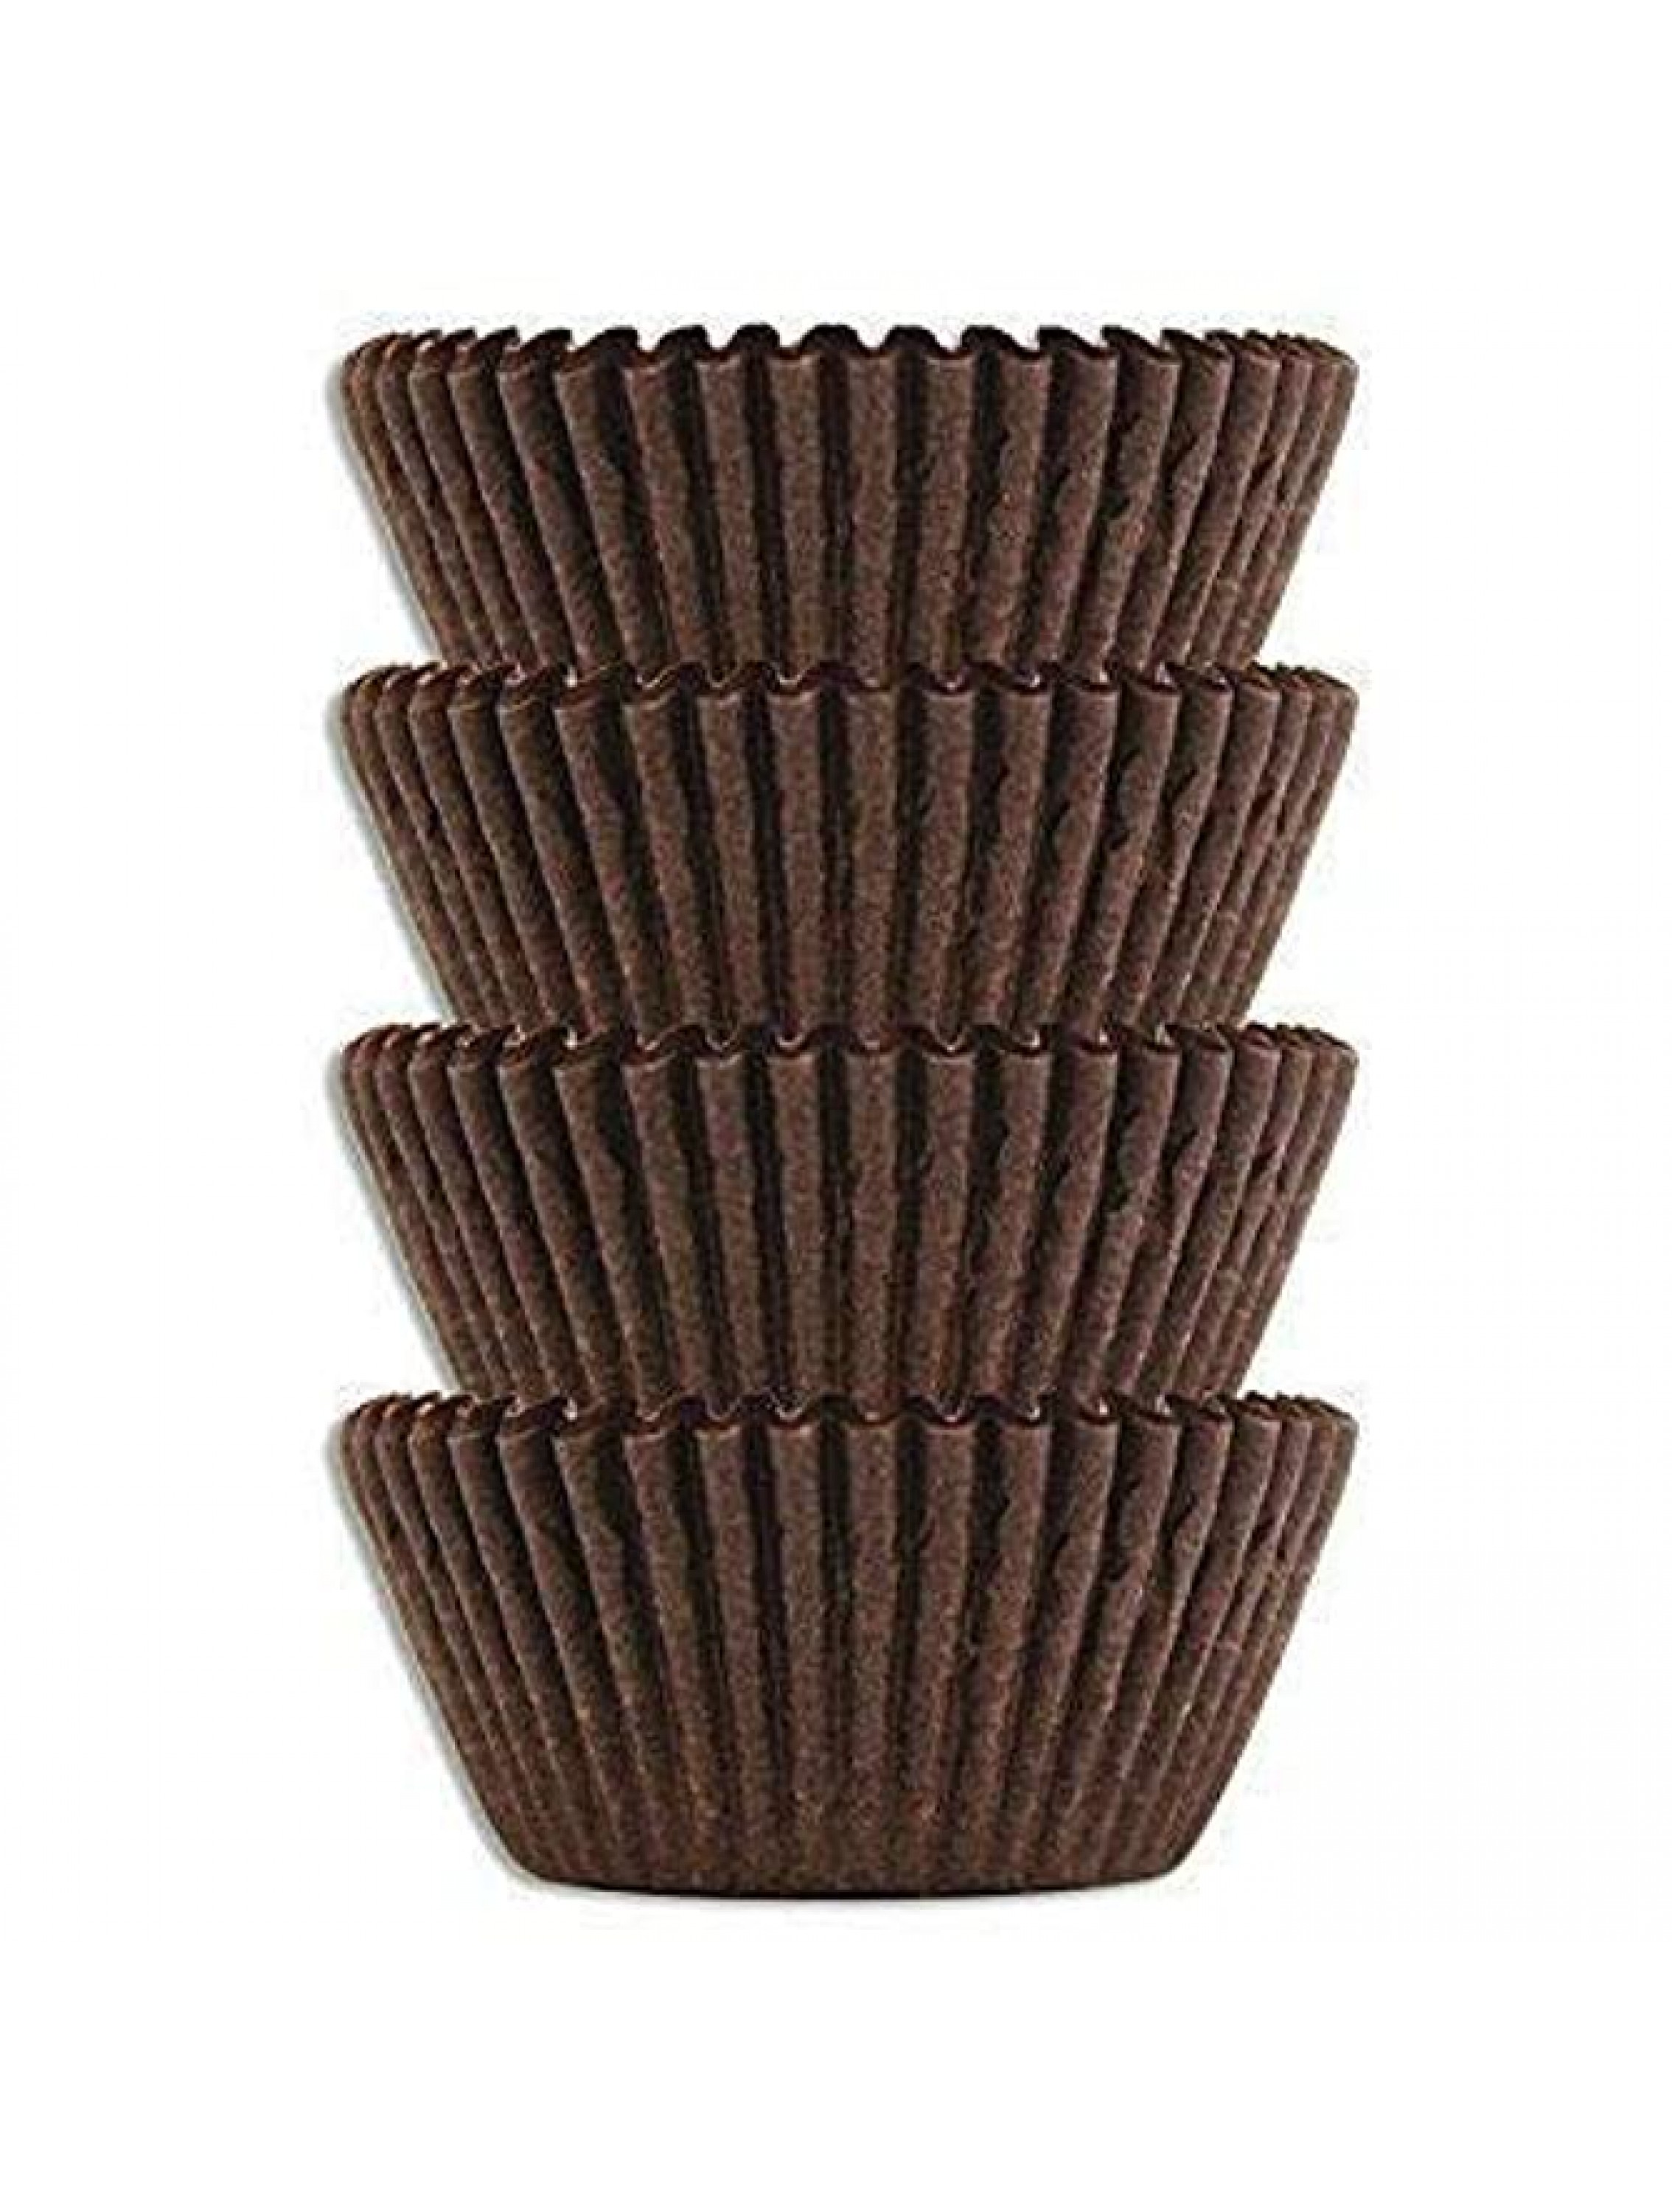 #4 Brown Glassine Paper Candy Cups Chocolate Peanut Butter Baking Liners 1000 - BG6KI4HZQ